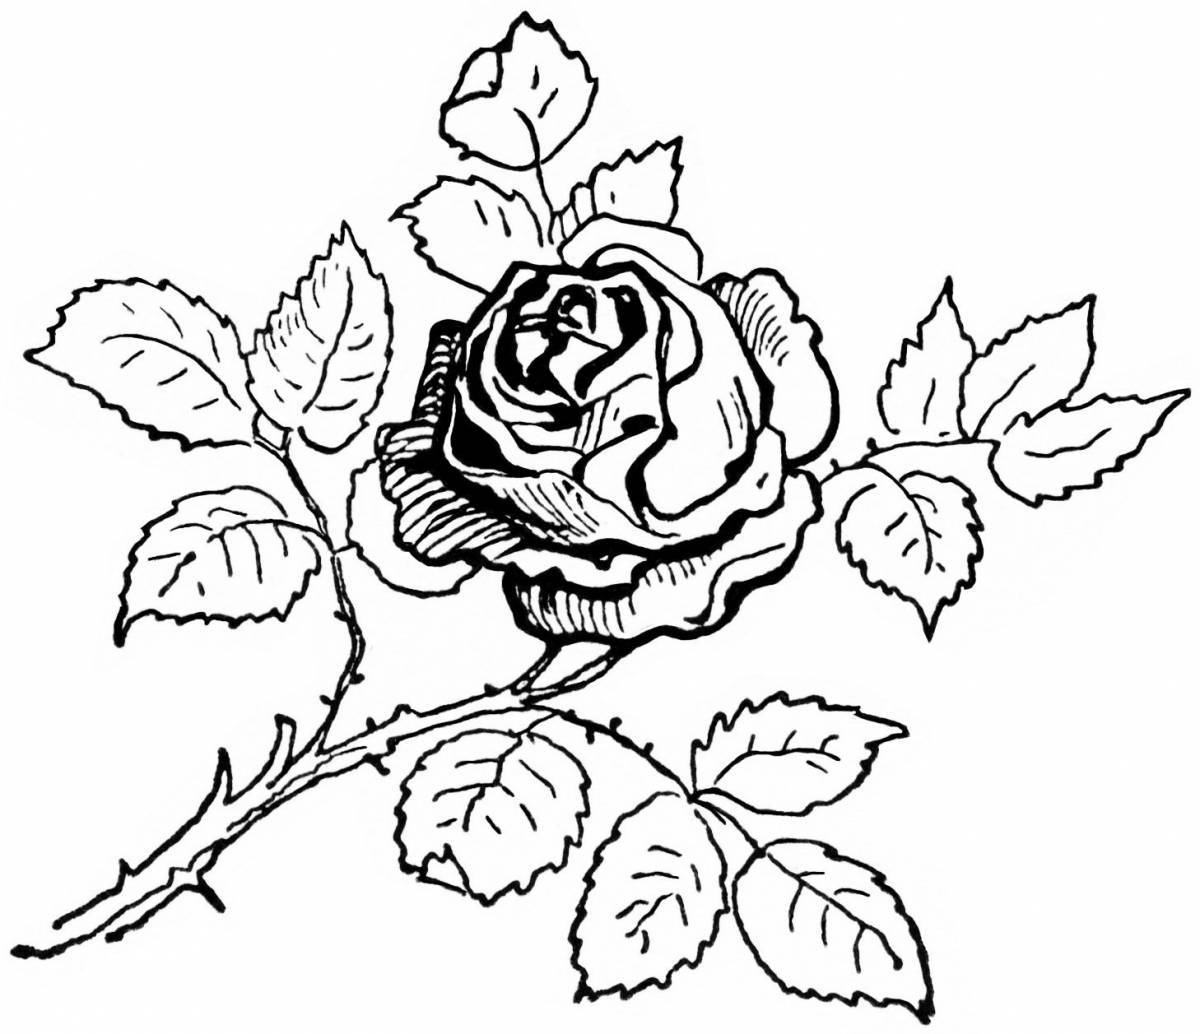 Coloring sublime rose